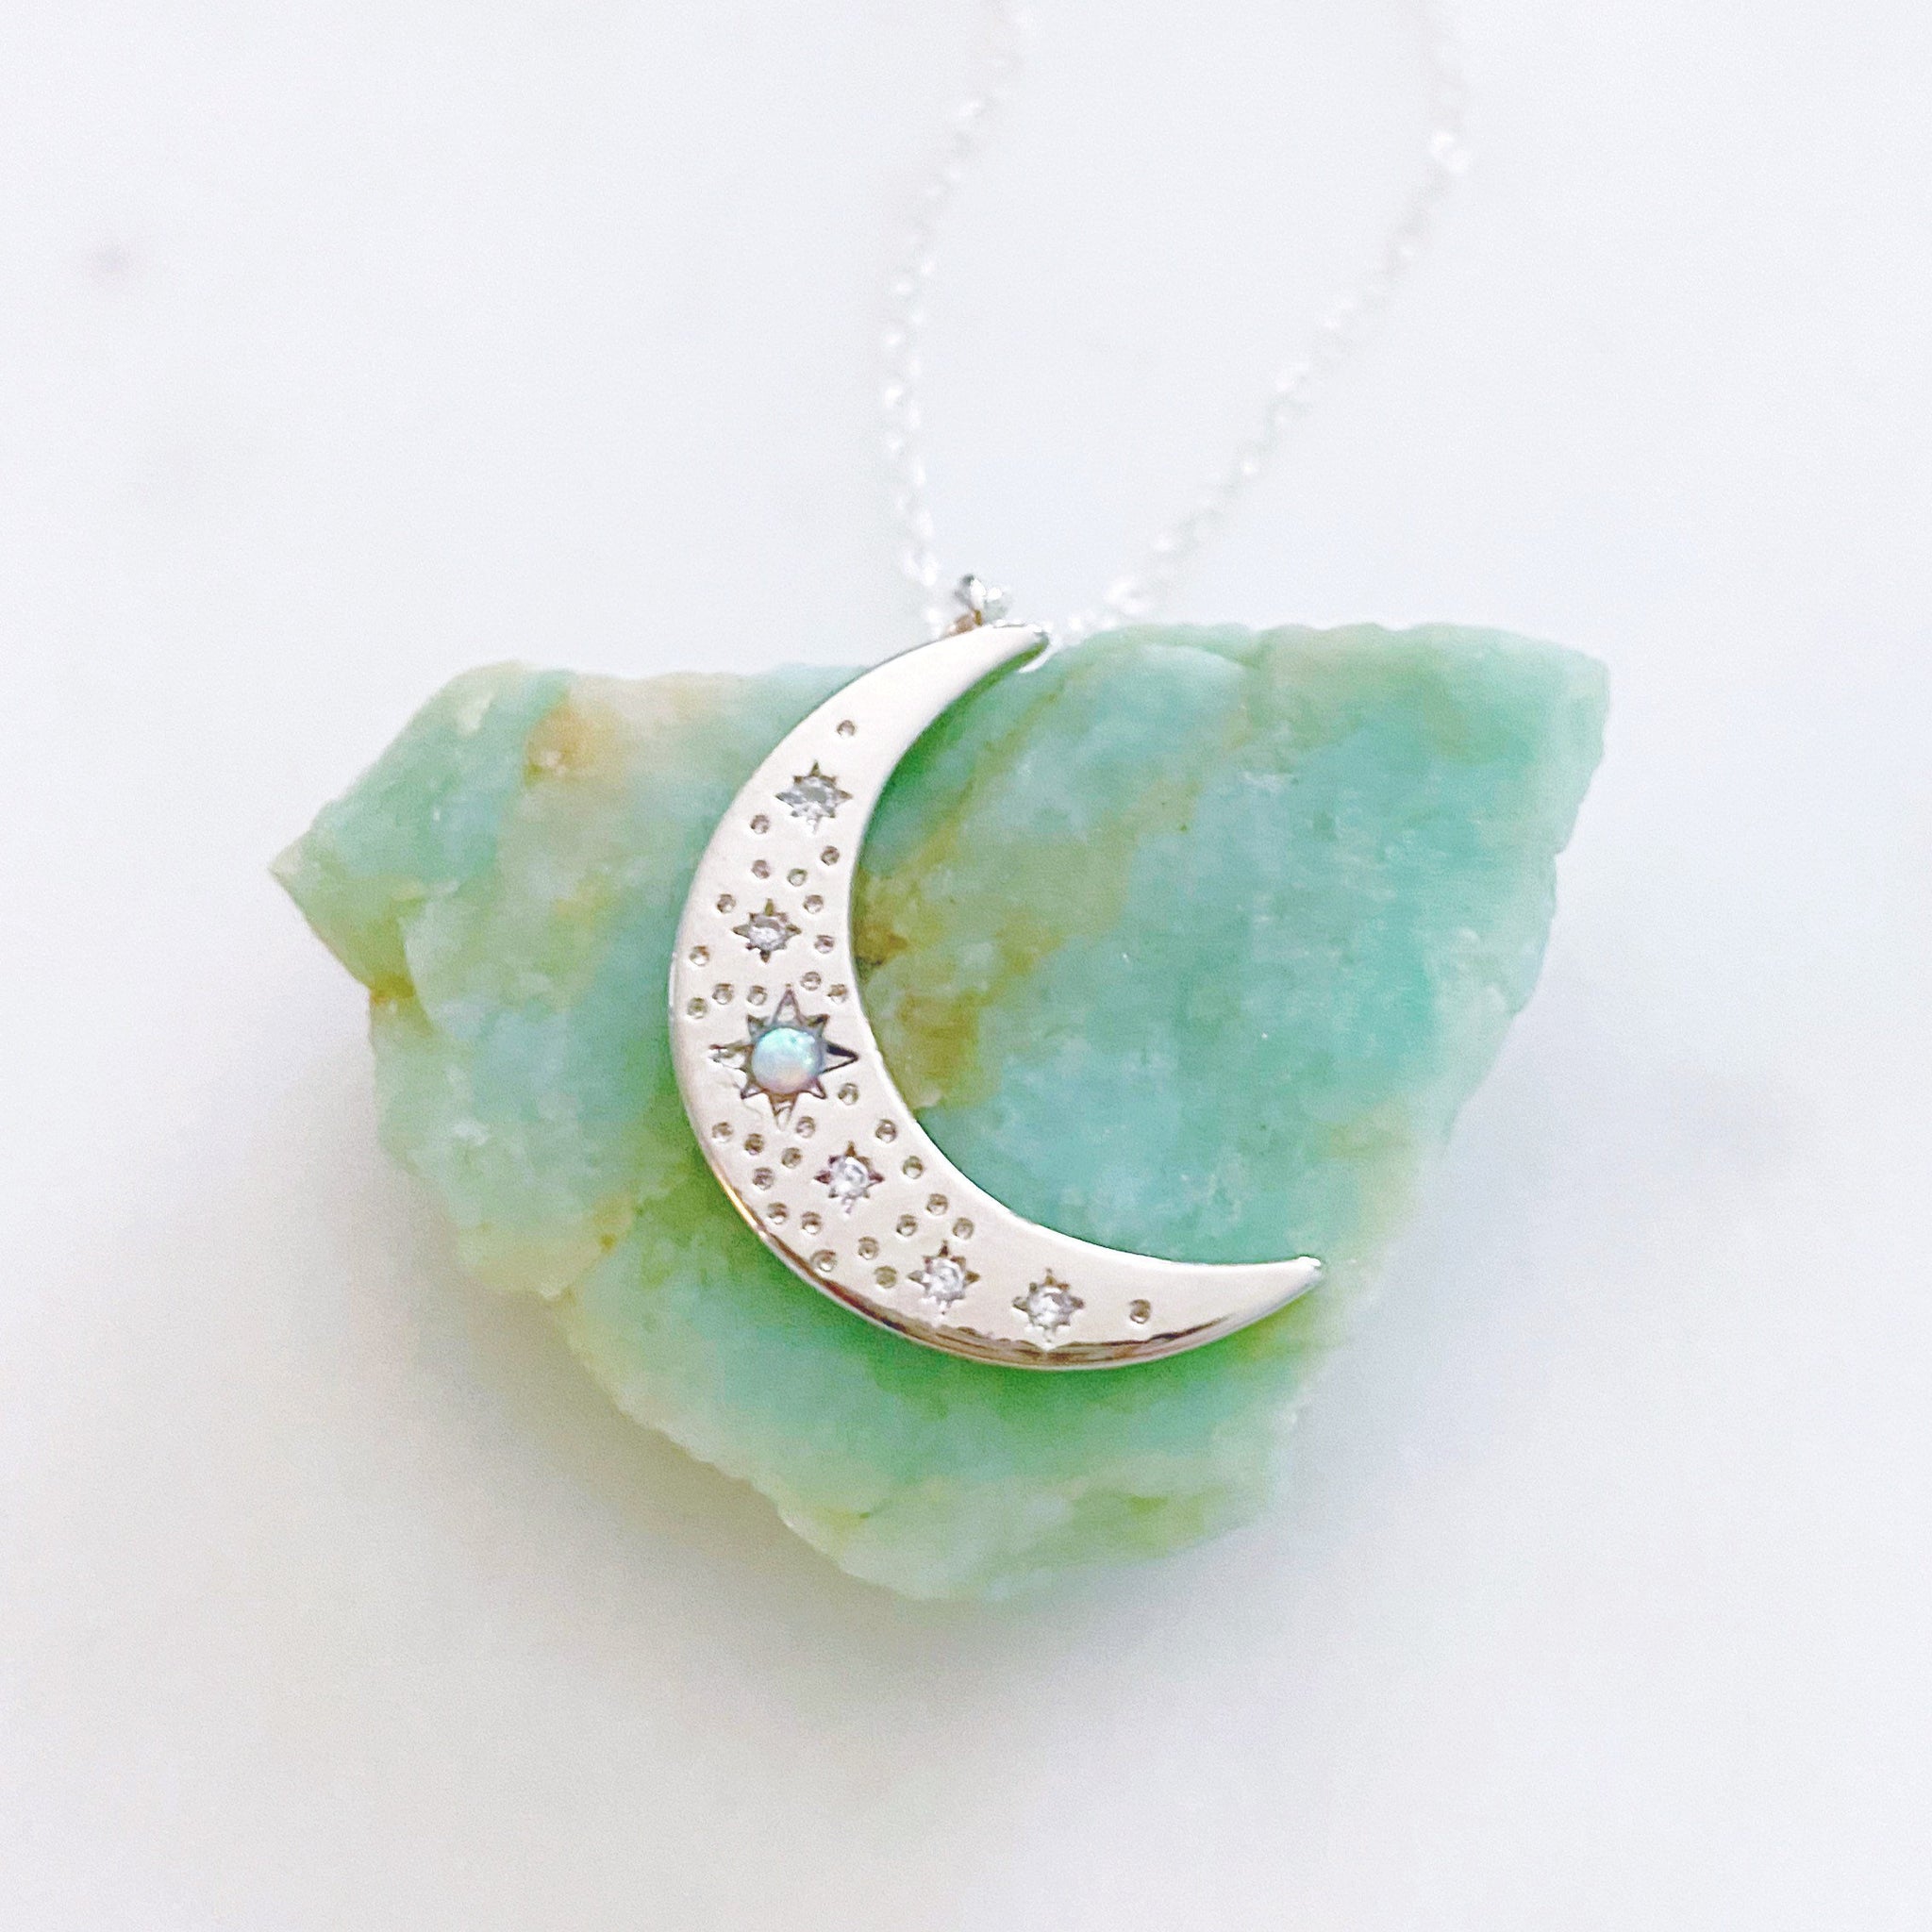 Moon Necklace, Opal Necklace, Sterling Silver Necklace, Mothers Day Gift from Daughter, Mom Gift, Estelle